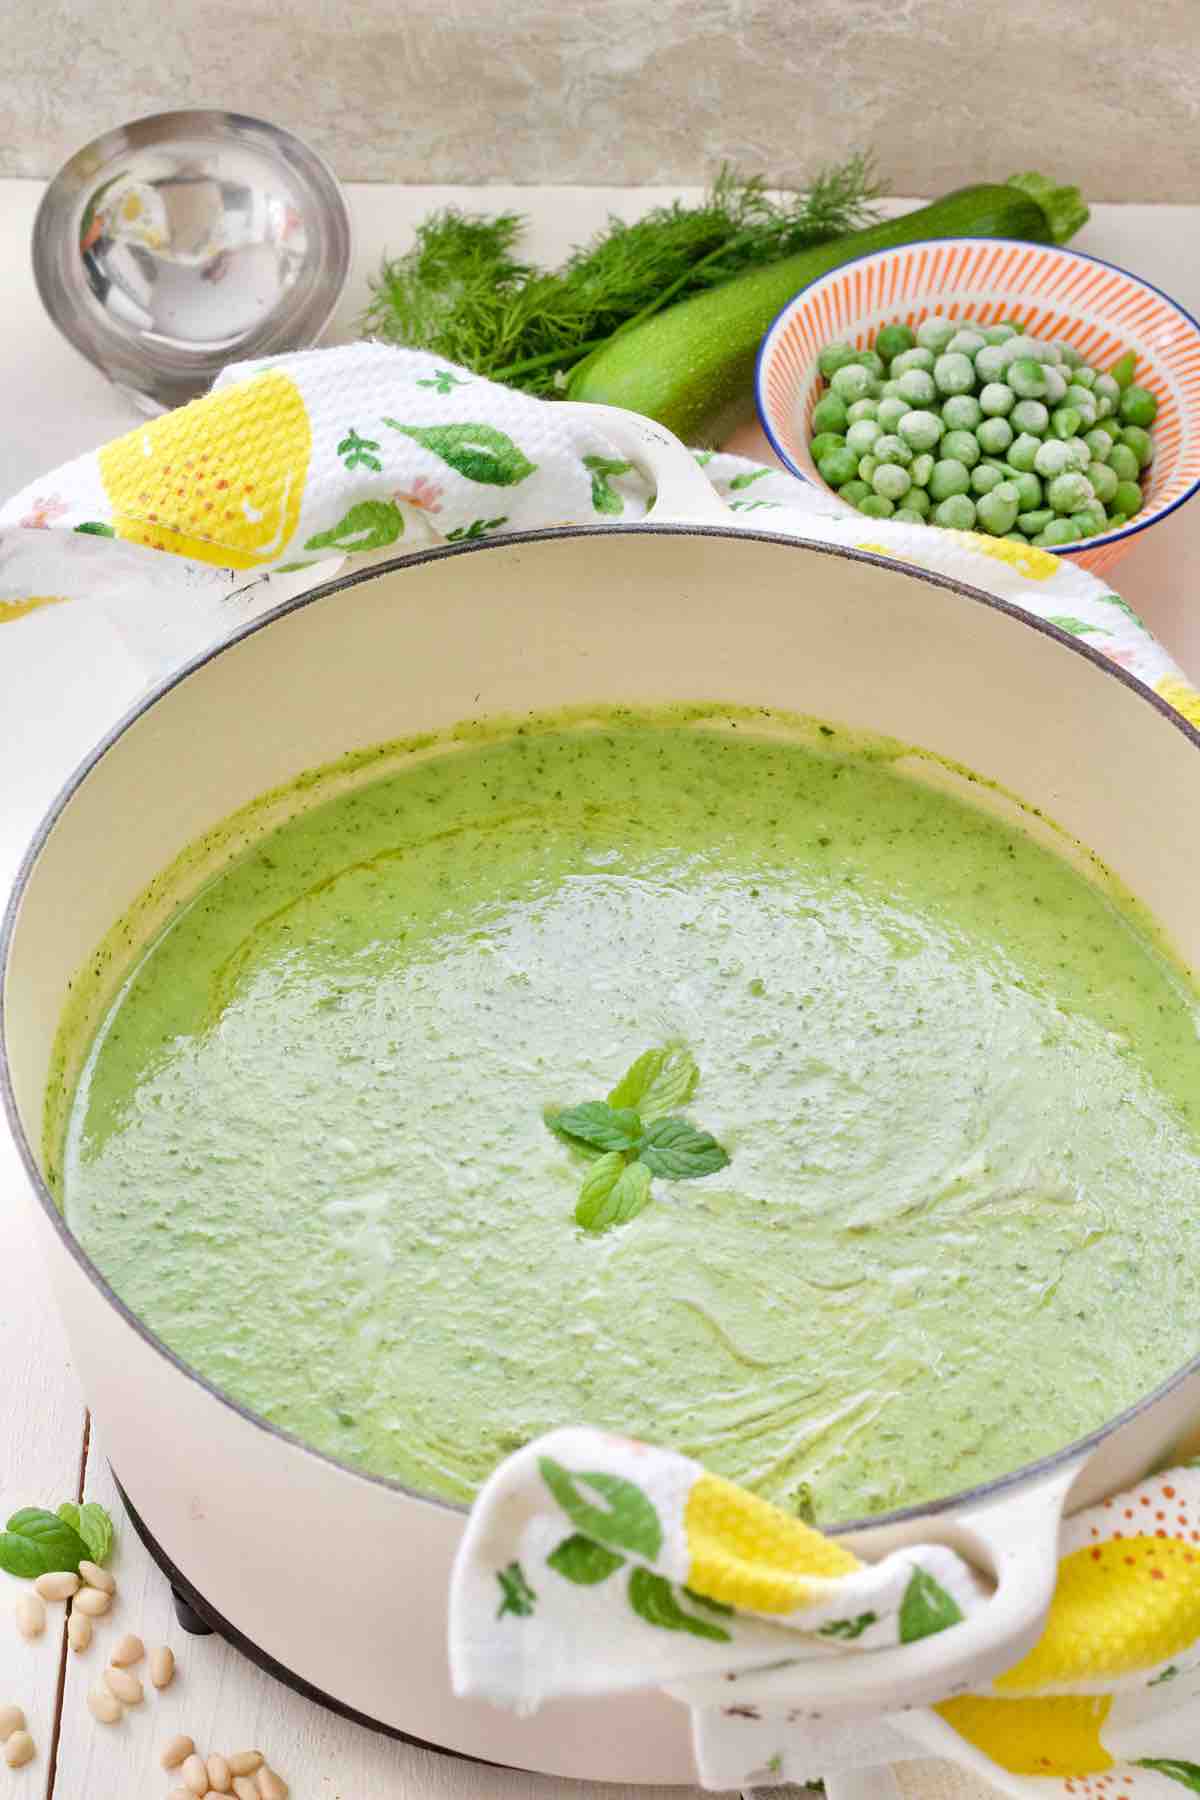 Pot with courgette soup with peas and mint.